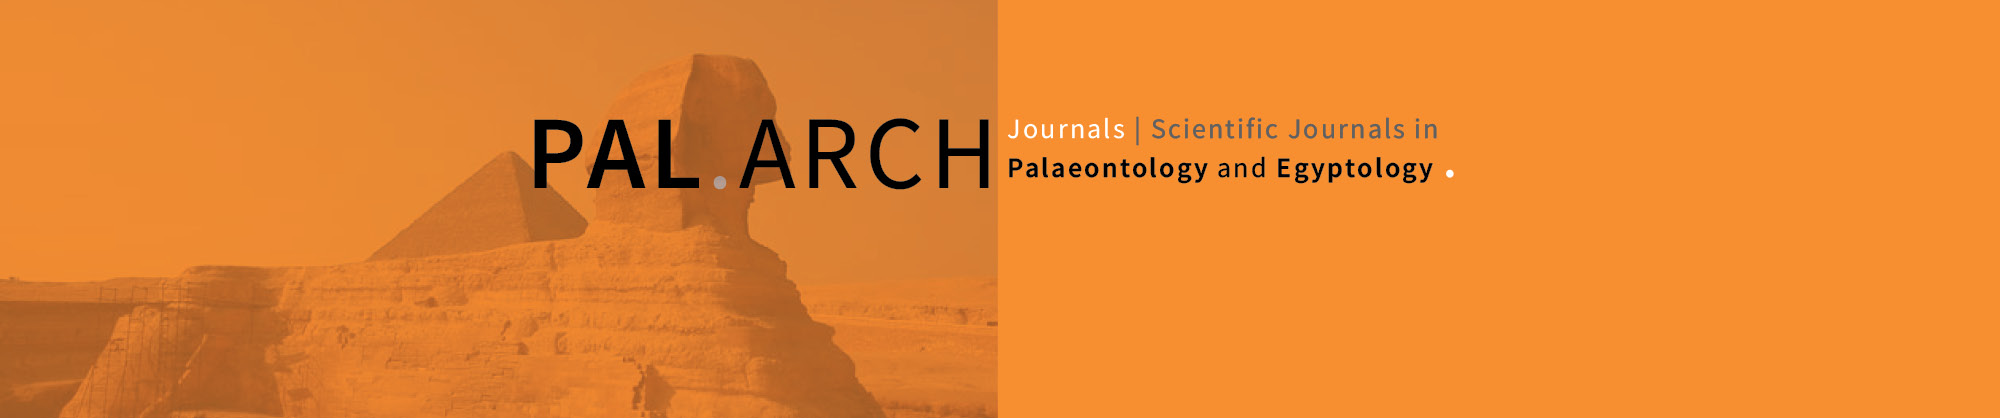 PalArch's Journal of Archaeology of Egypt / Egyptology